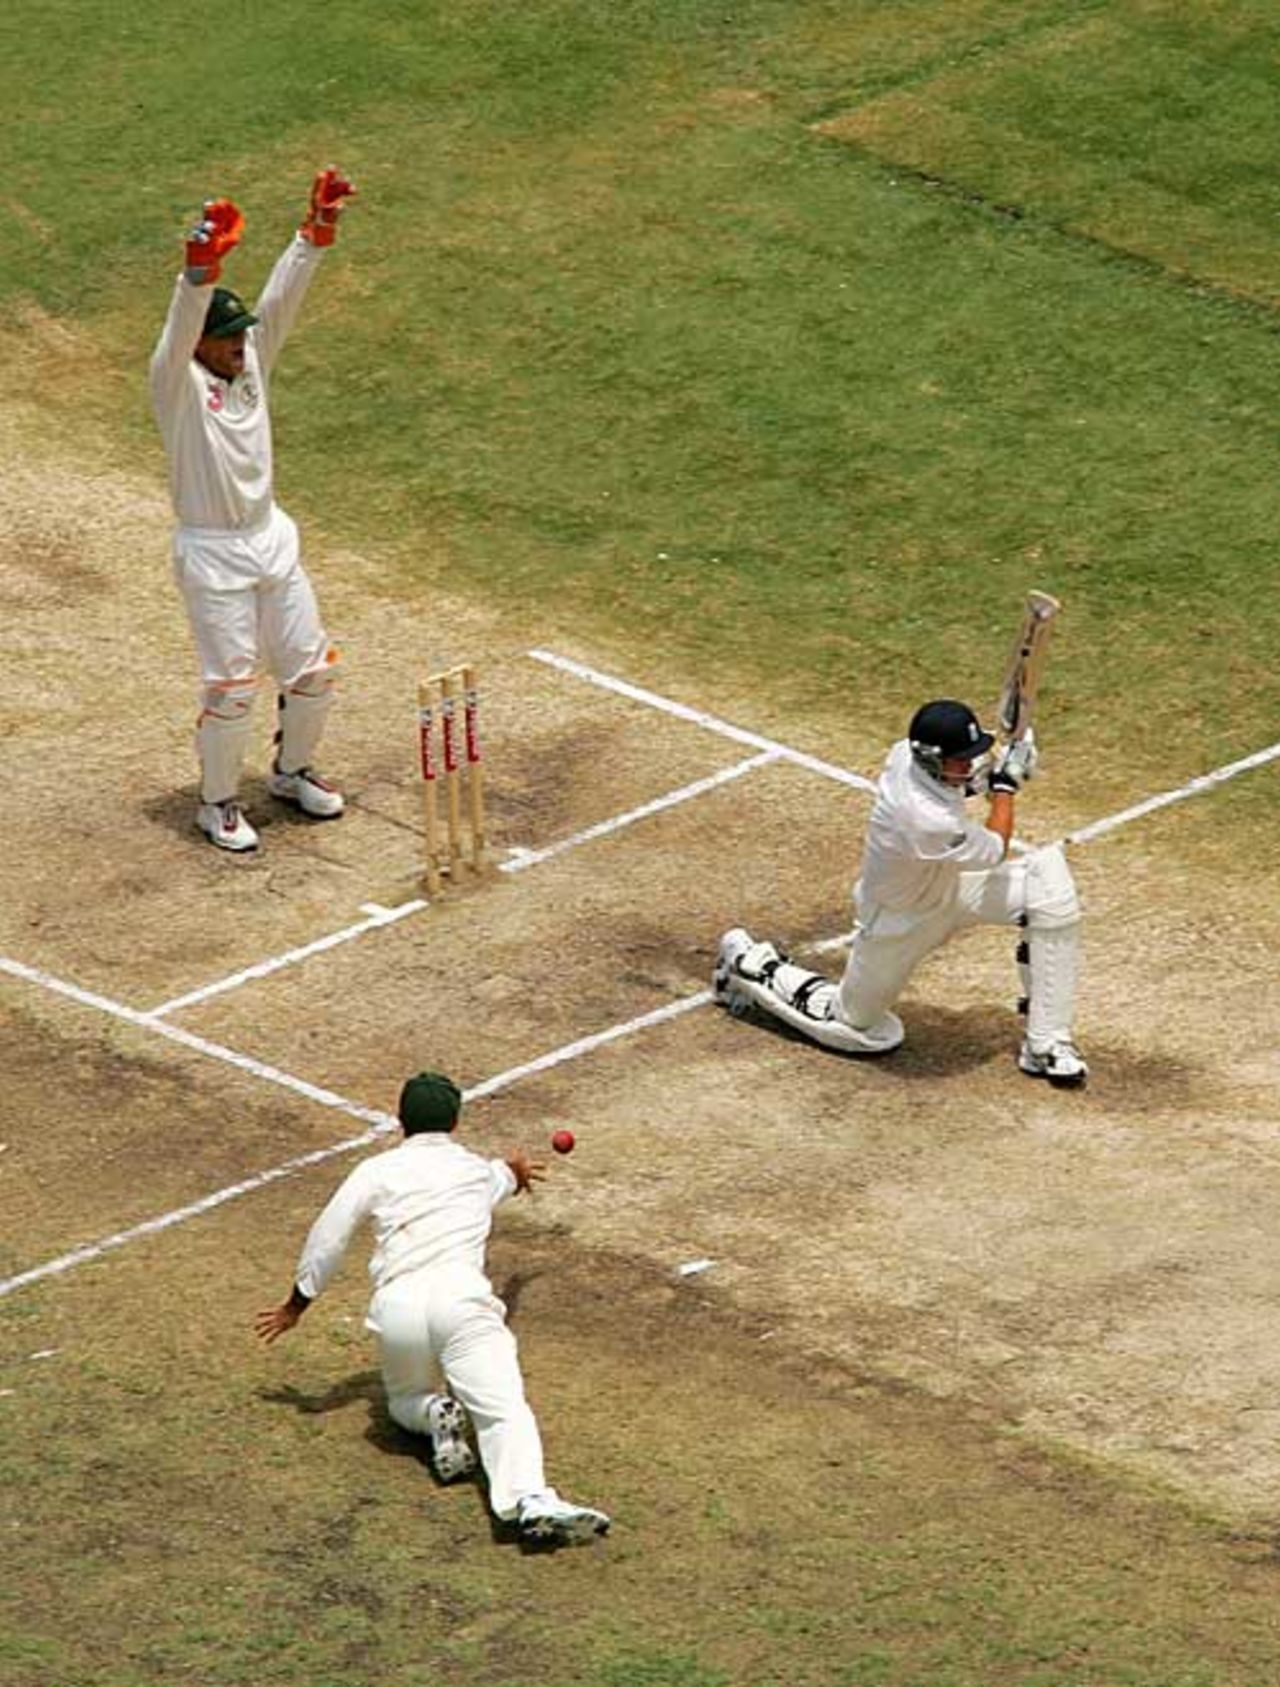 Geraint Jones is run out by Ricky Ponting, Australia v England, 3rd Test, Perth, December 18, 2006